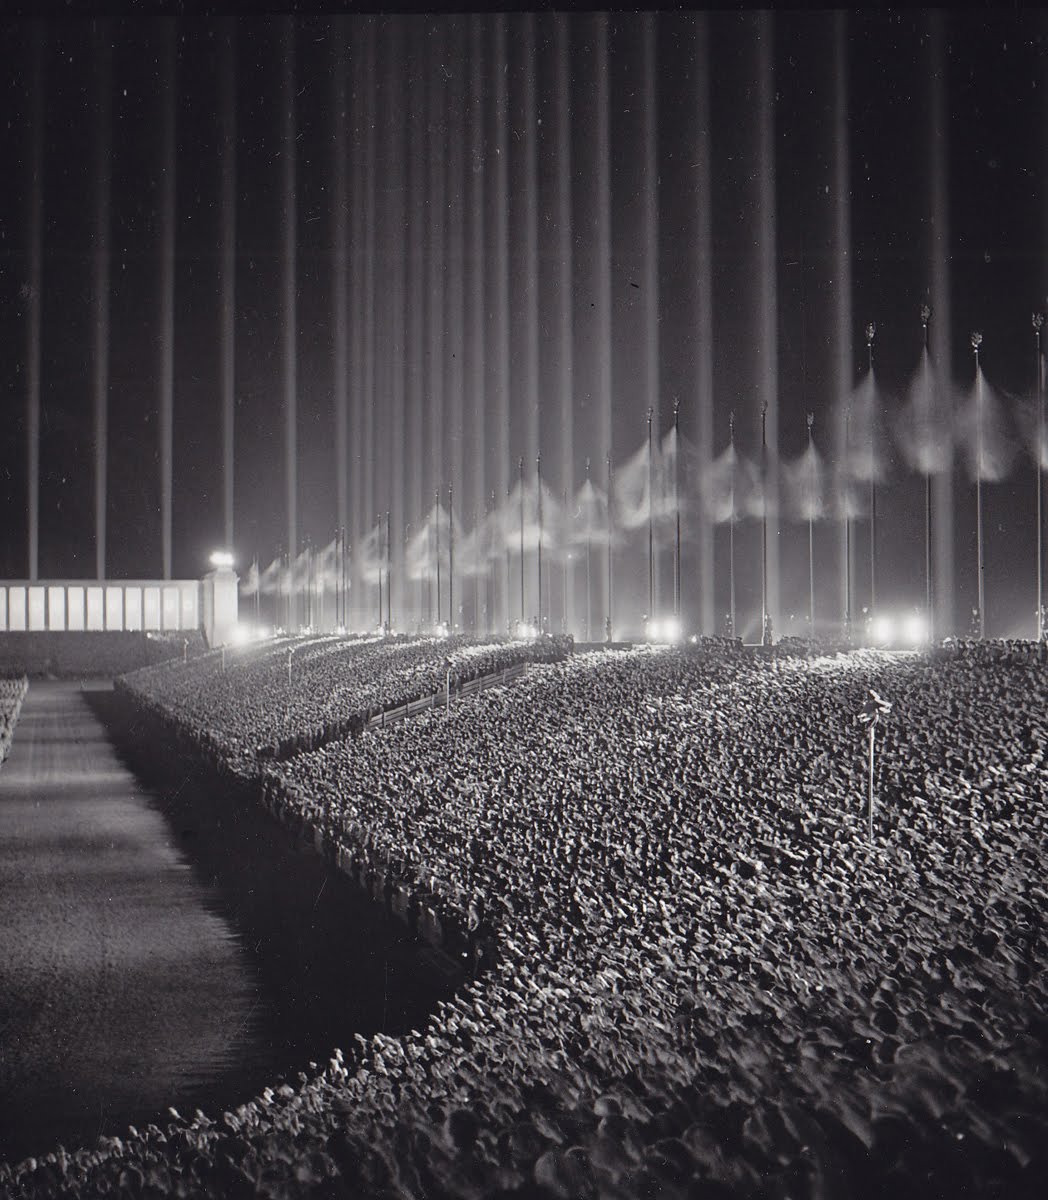 Nazi rally in the "Cathedral of Light", 1937.